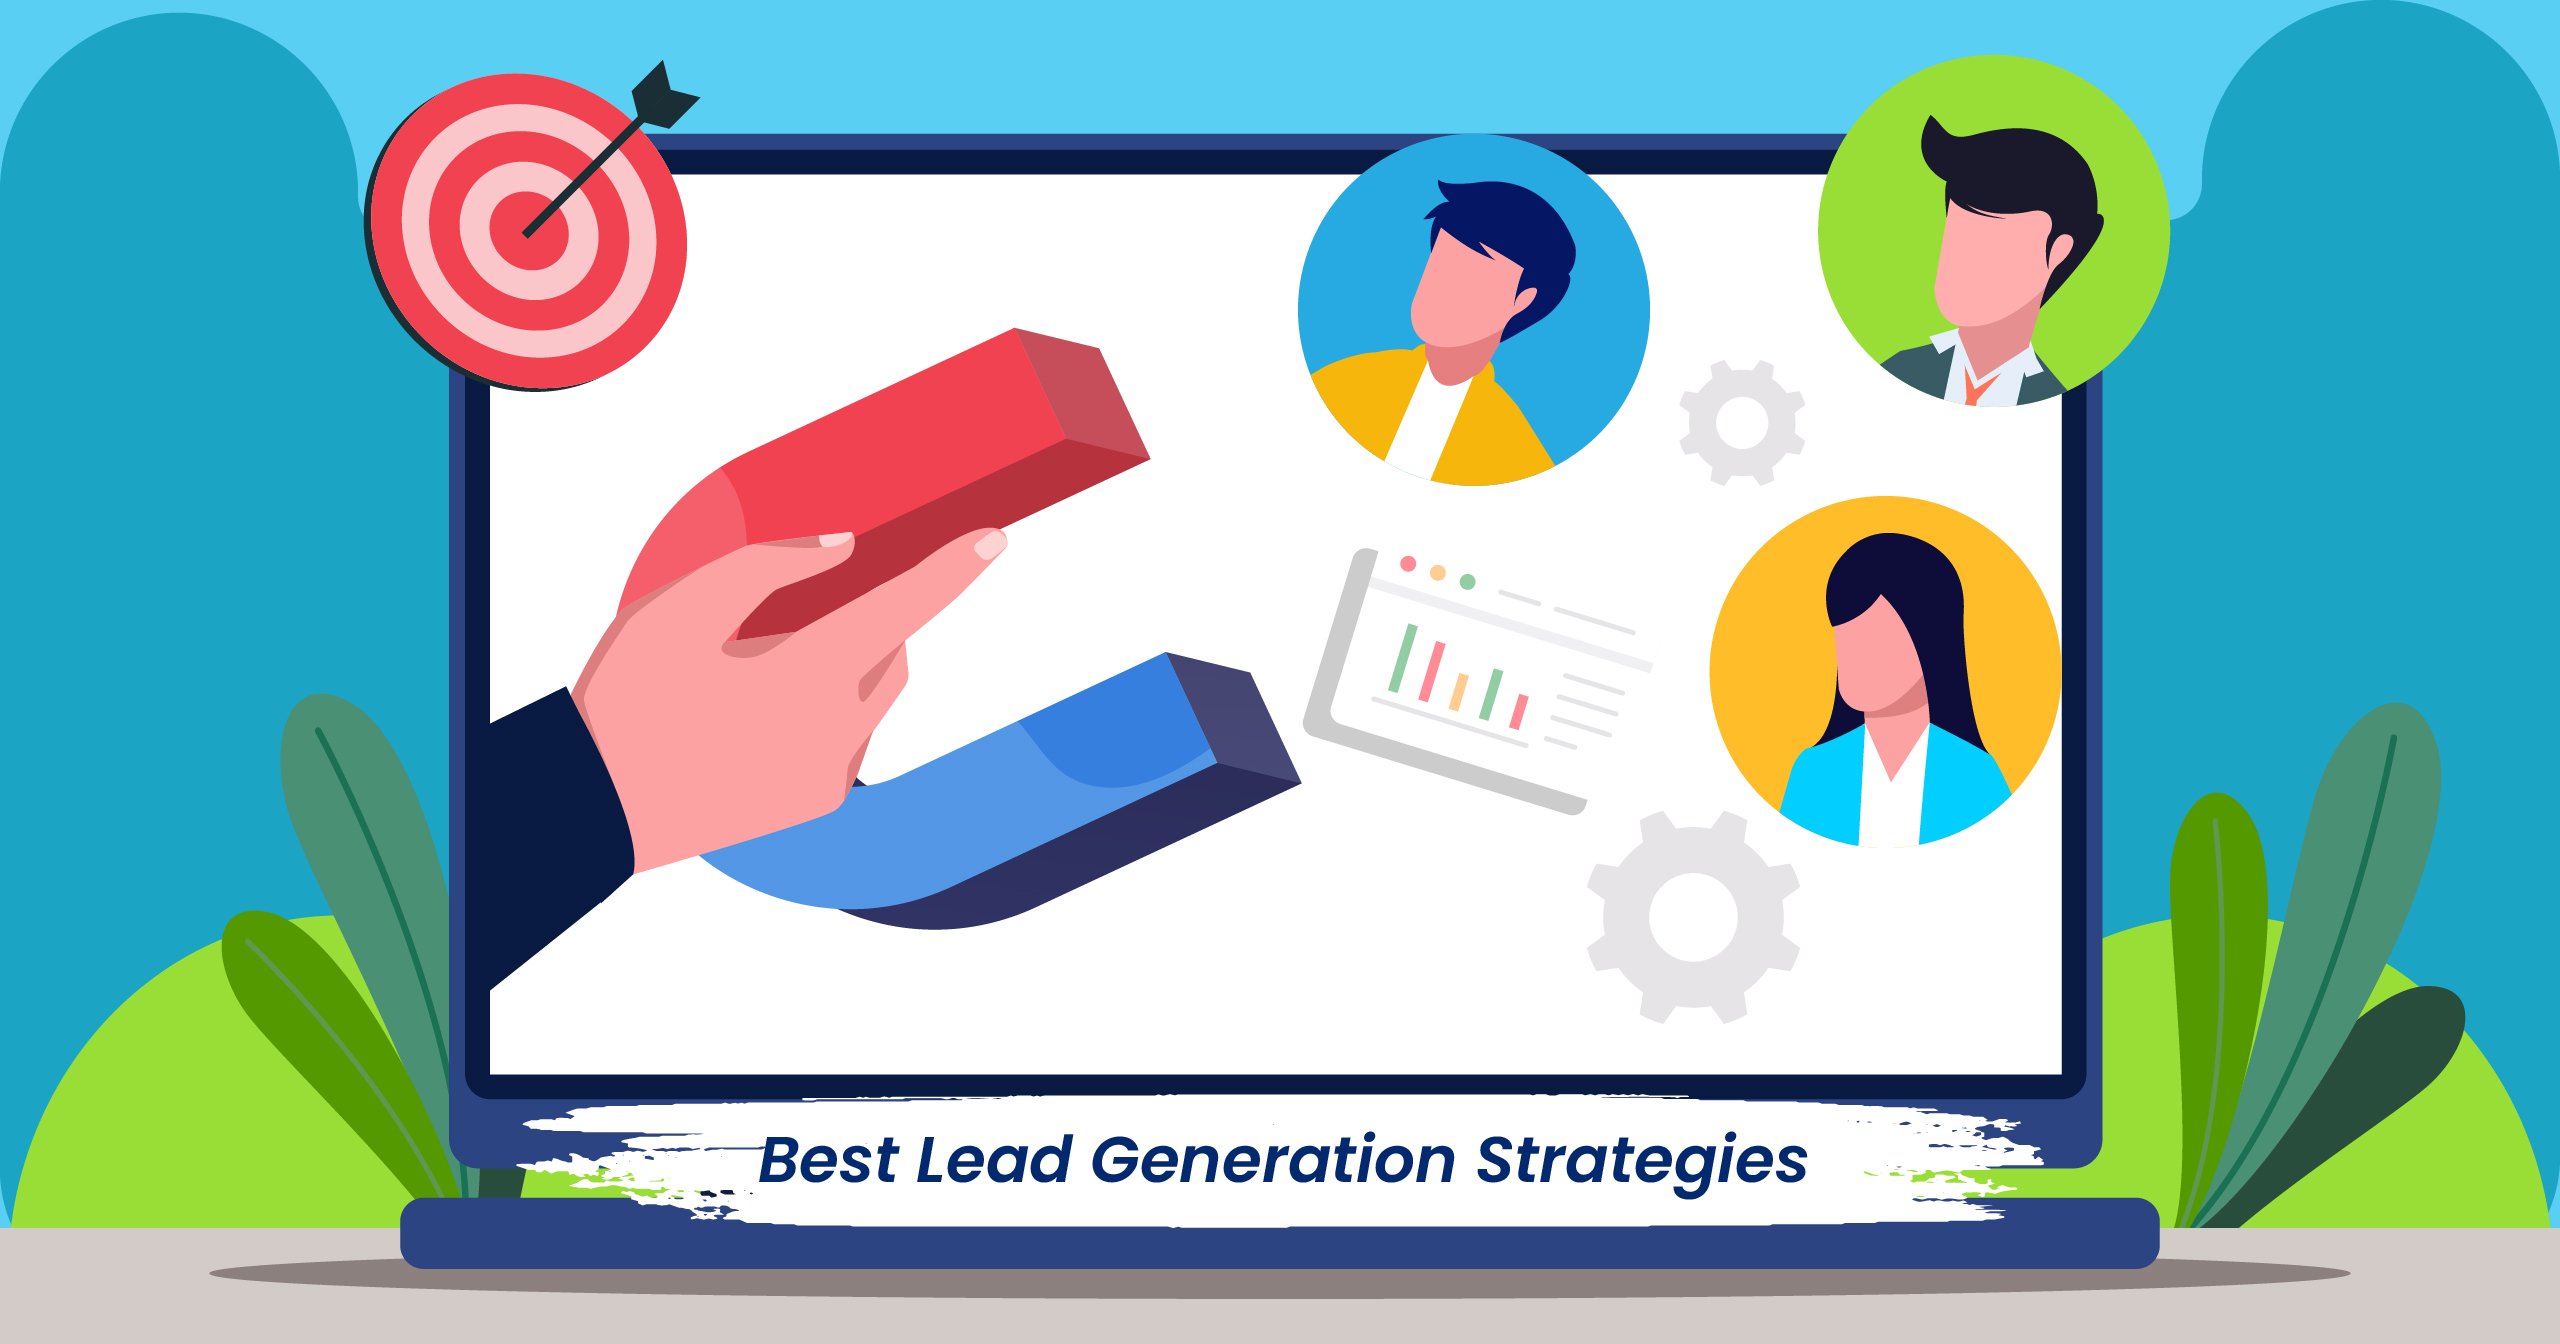 15 Best Lead Generation Strategies For Early Stage Startups